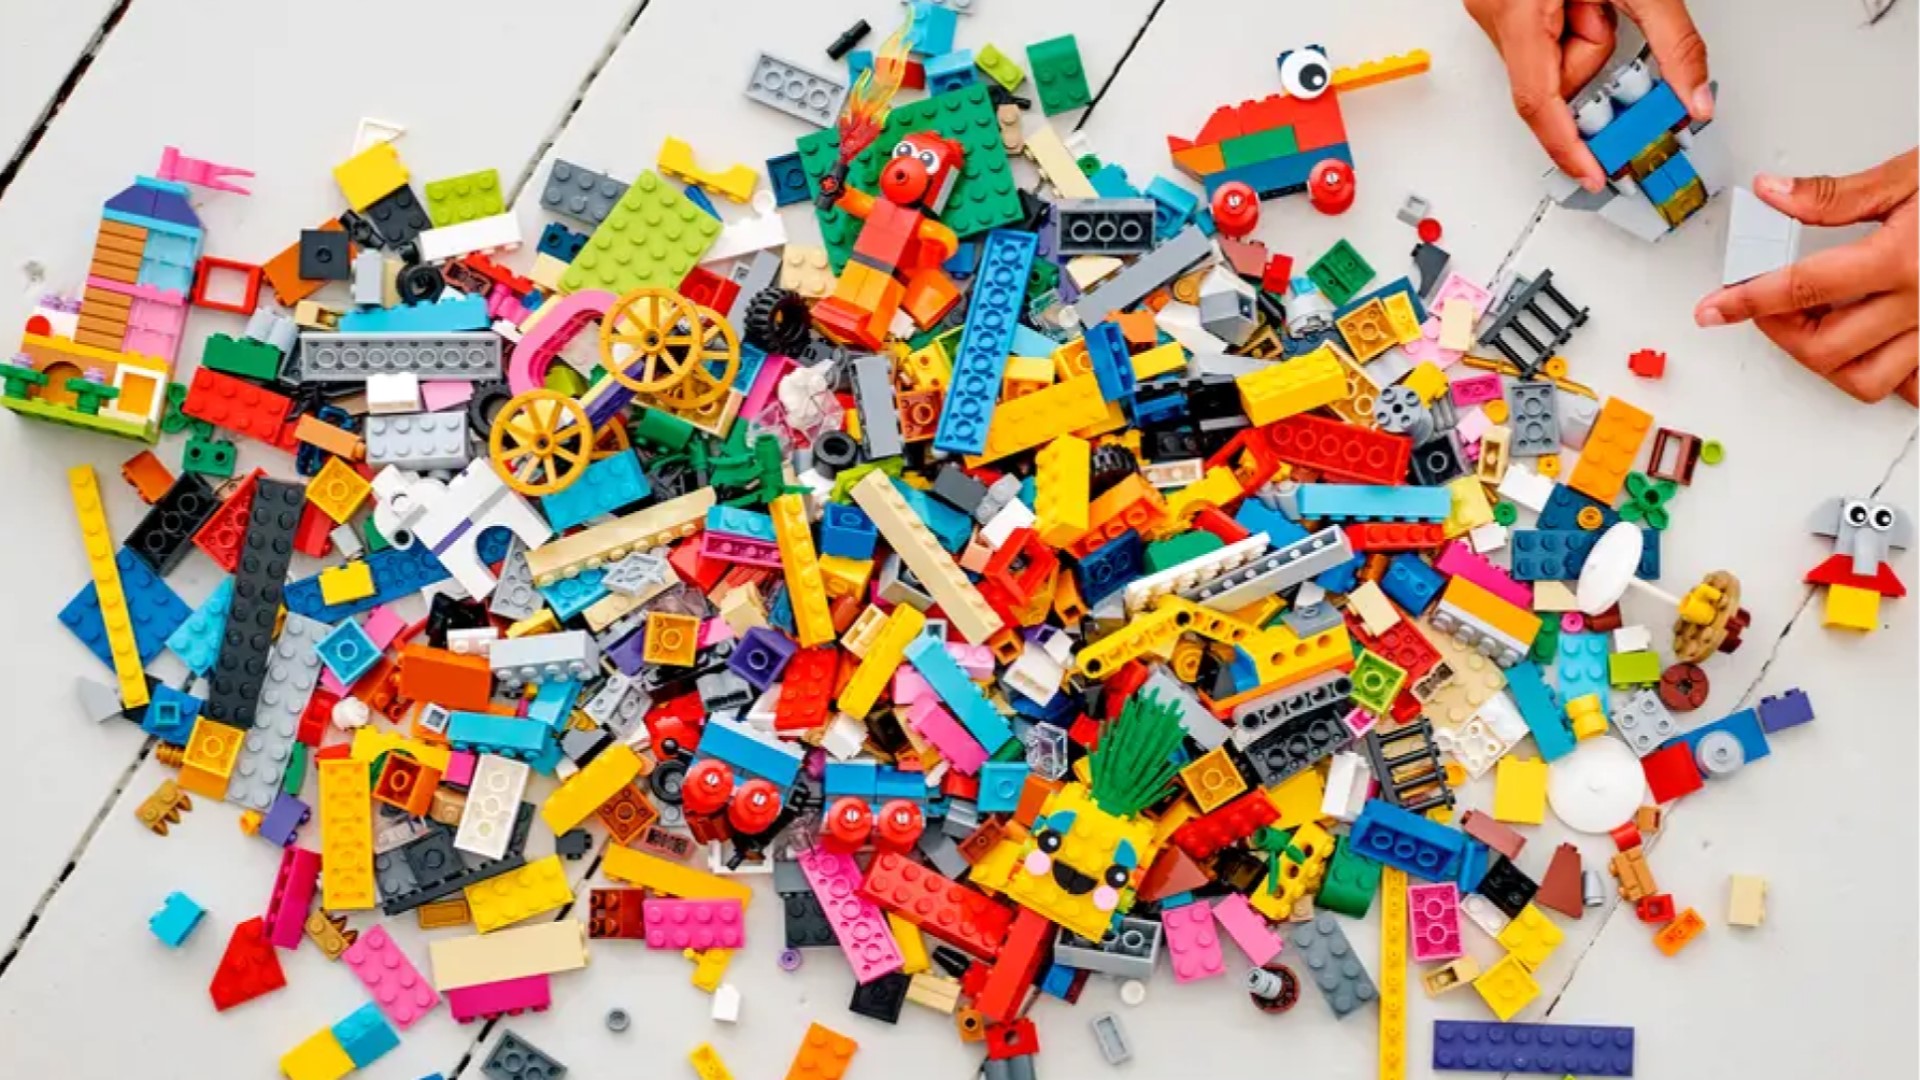 Best Lego sets - a large assorted pile of lego bricks, with a few small builds strewn among them.